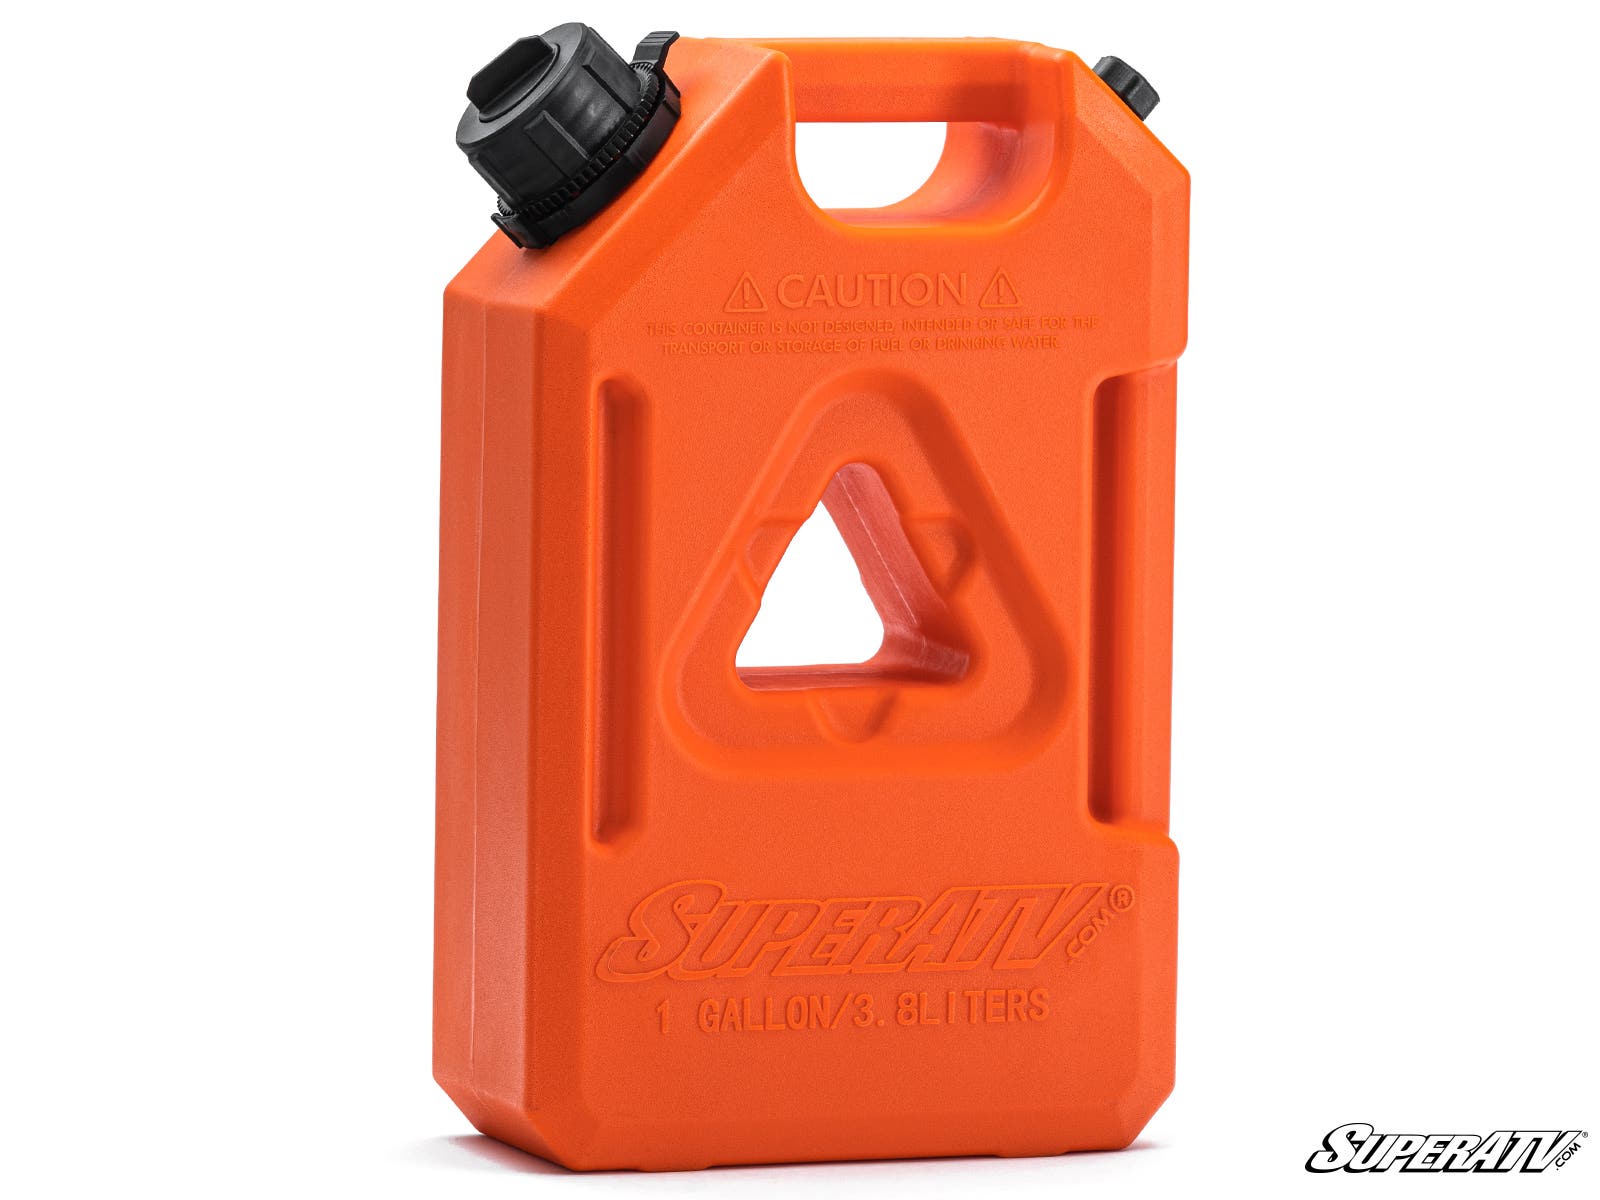 Jerry Can—1 & 3 Gallon